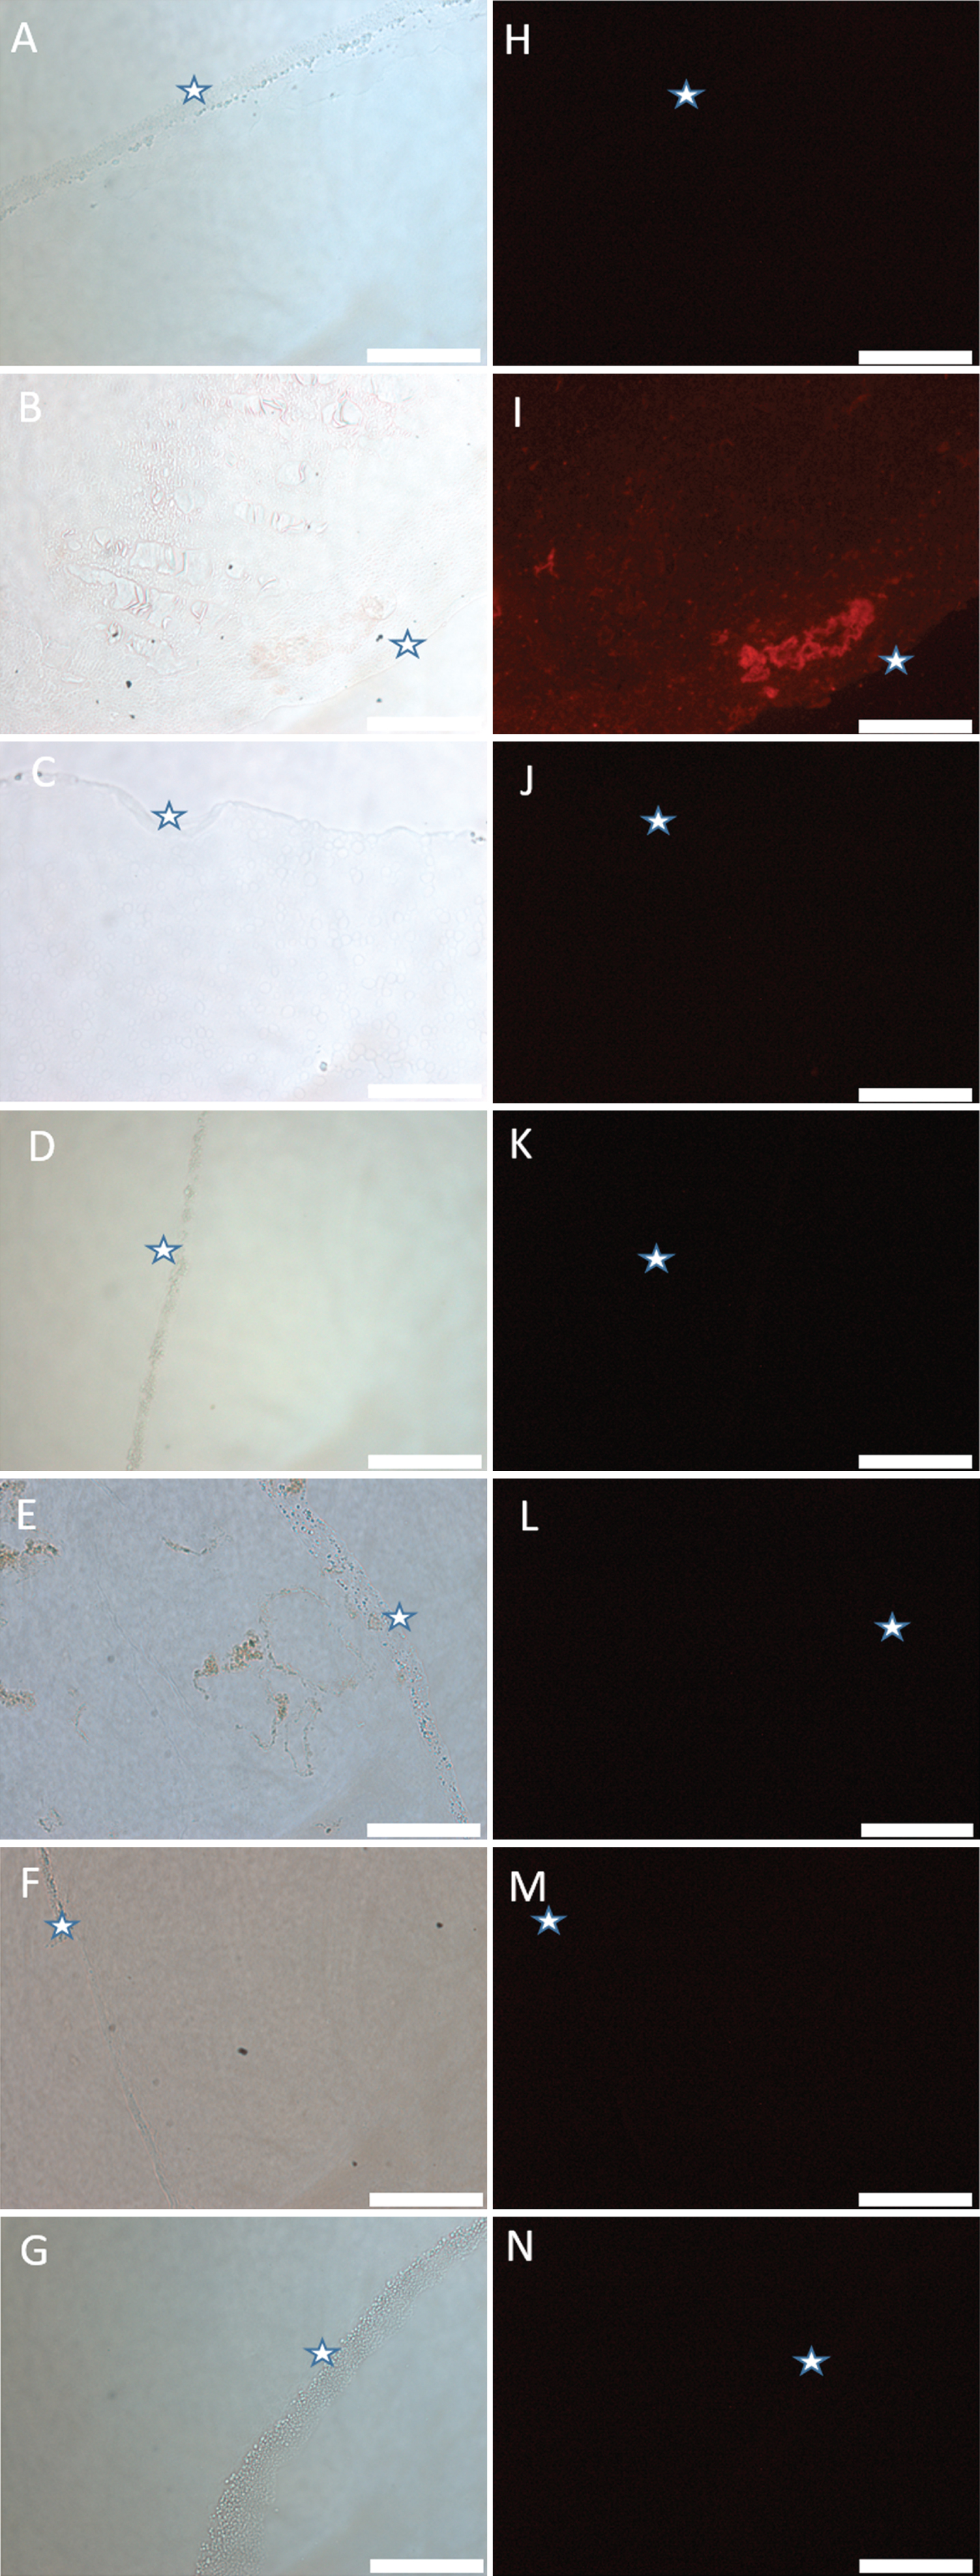 Light and fluorescence images of metal-impregnated agarose blocks stained with lumogallion. A, H) agarose gel only; B, I) agarose gel + Al(III); C, J) agarose gel + Ca(II); D, K) agarose gel + Cu(II); E, L) agarose gel + Fe(III); F, M) agarose gel + Mg(II); G, N) agarose gel + Zn(II). Stars indicate equivalent areas of each agarose block. Scale bar is 50 μm.